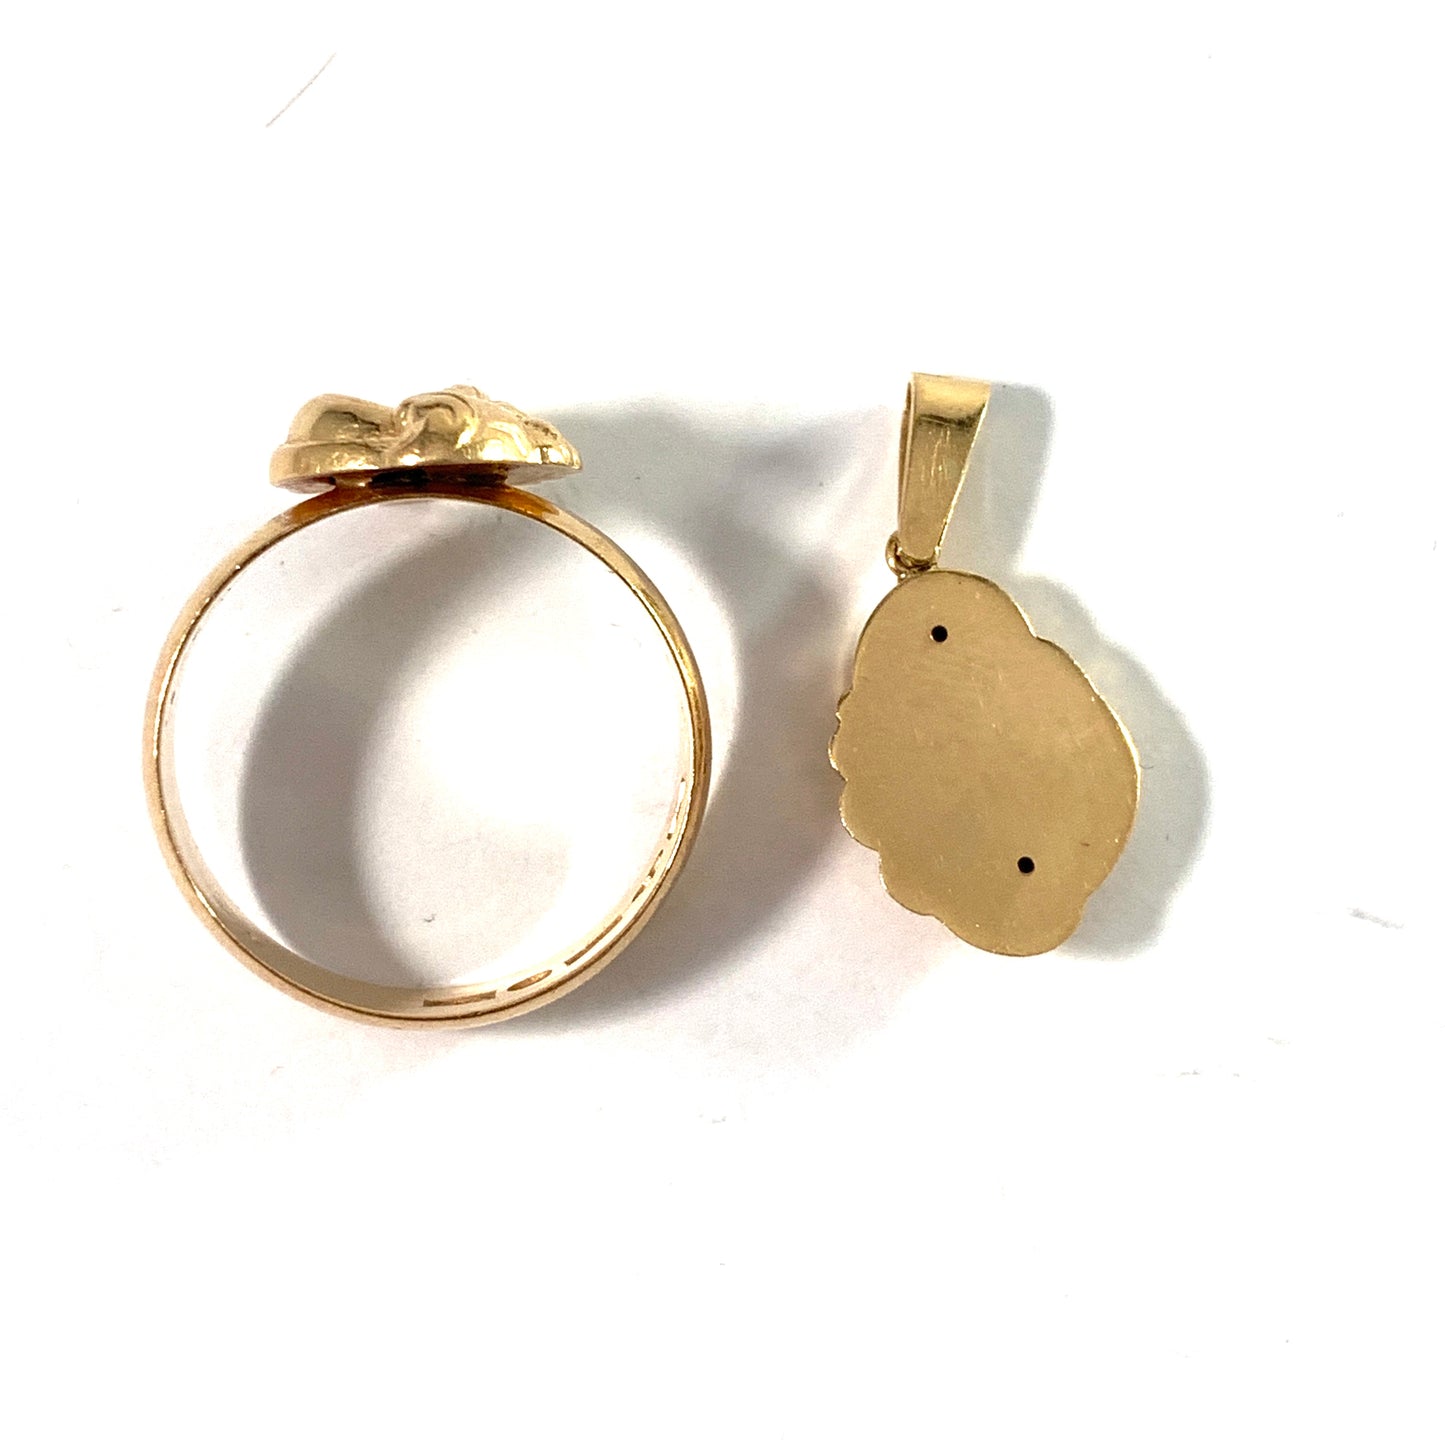 Carl Söderqvist, Sweden year 1900, Antique 18k Gold Ring and small Pendant.